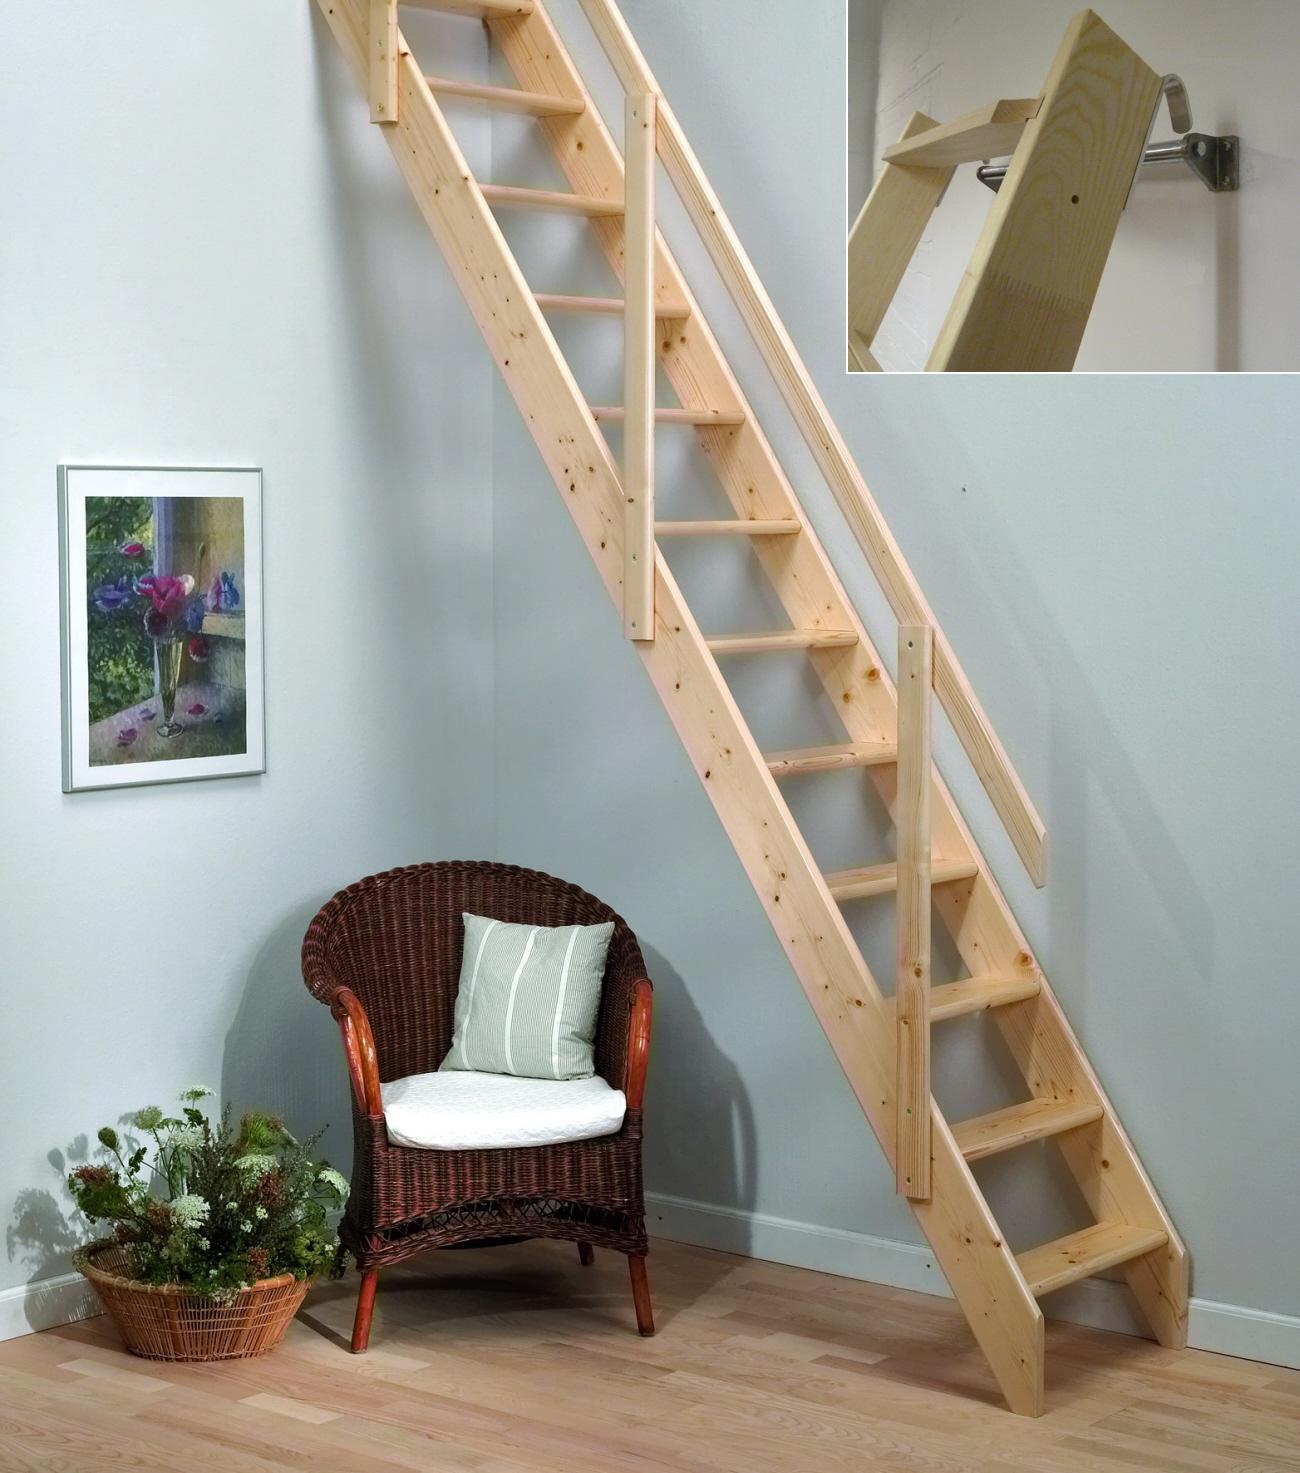 Madrid Wooden Space Saver Staircase Kit Loft Stair Ladder